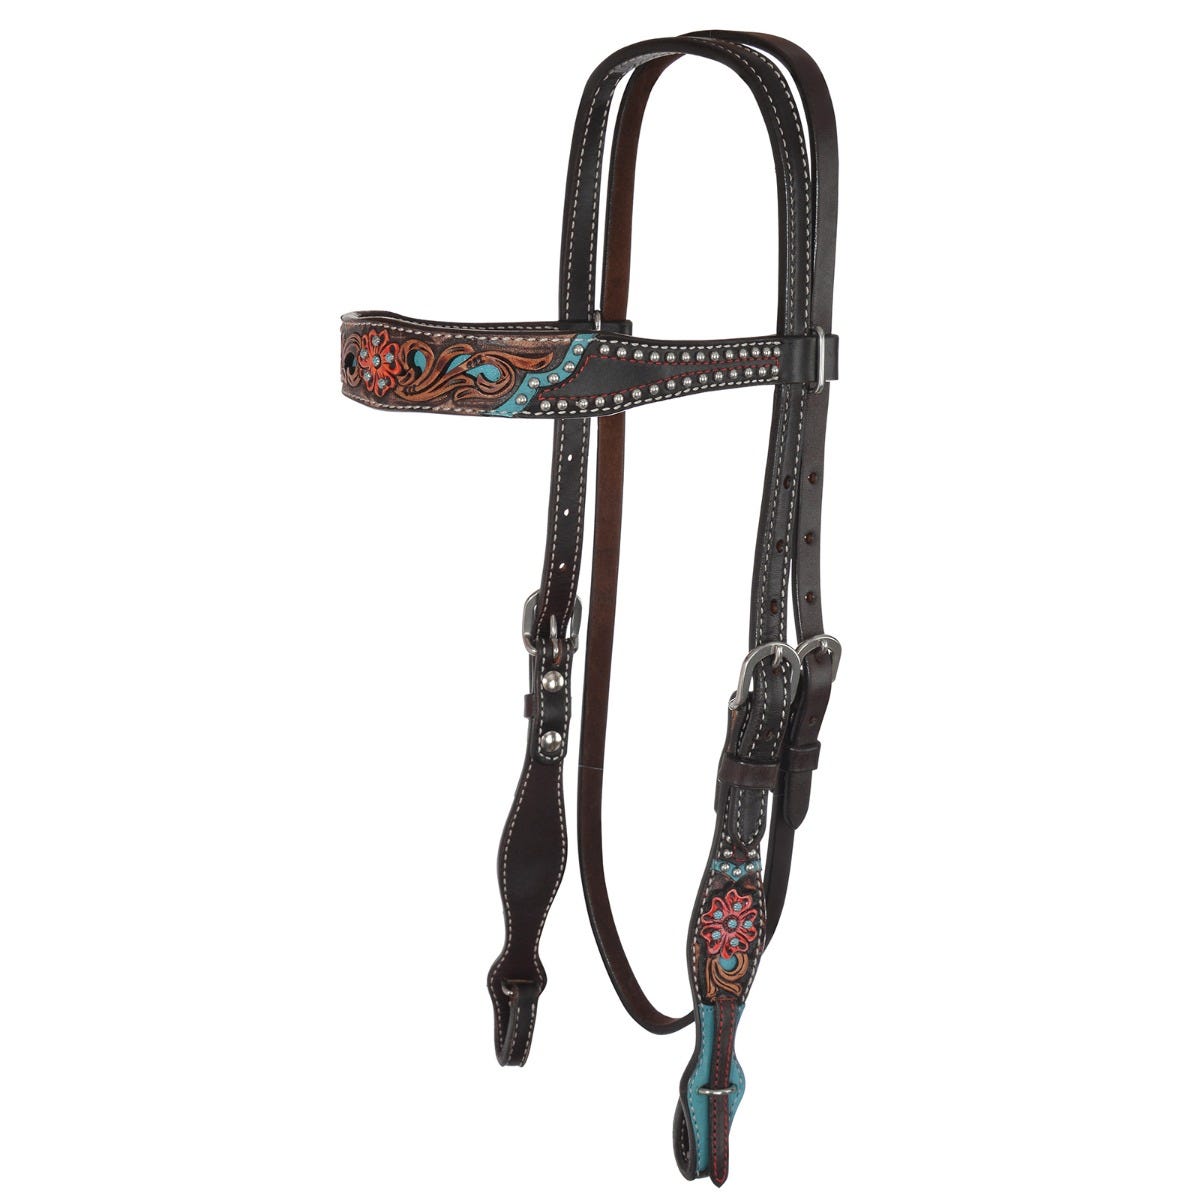 Quick Flower Browband Headstall 0